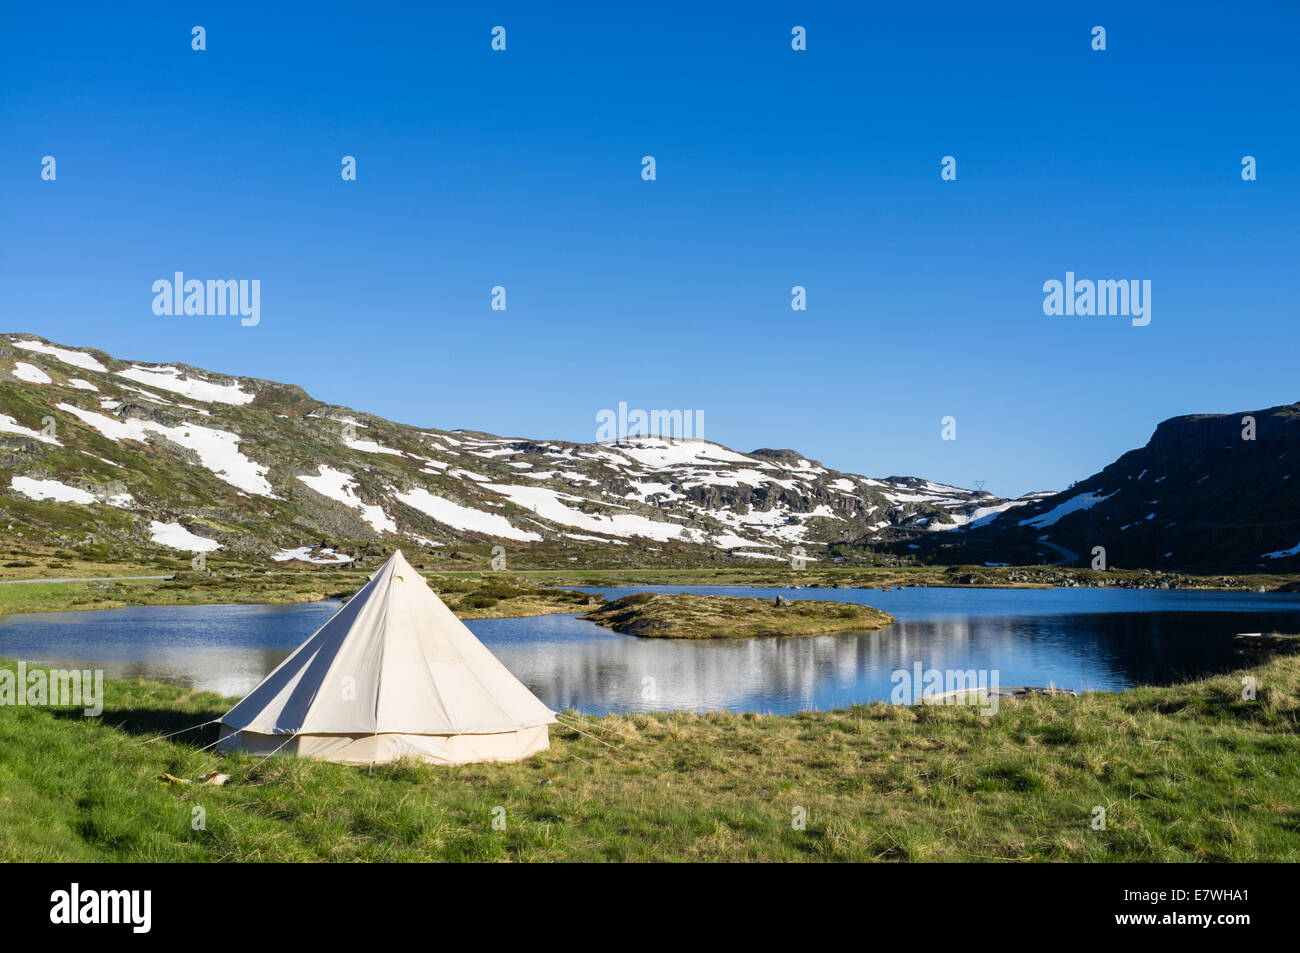 Tent by a mountain lake, Aurlandsdalen valley, Norway Stock Photo